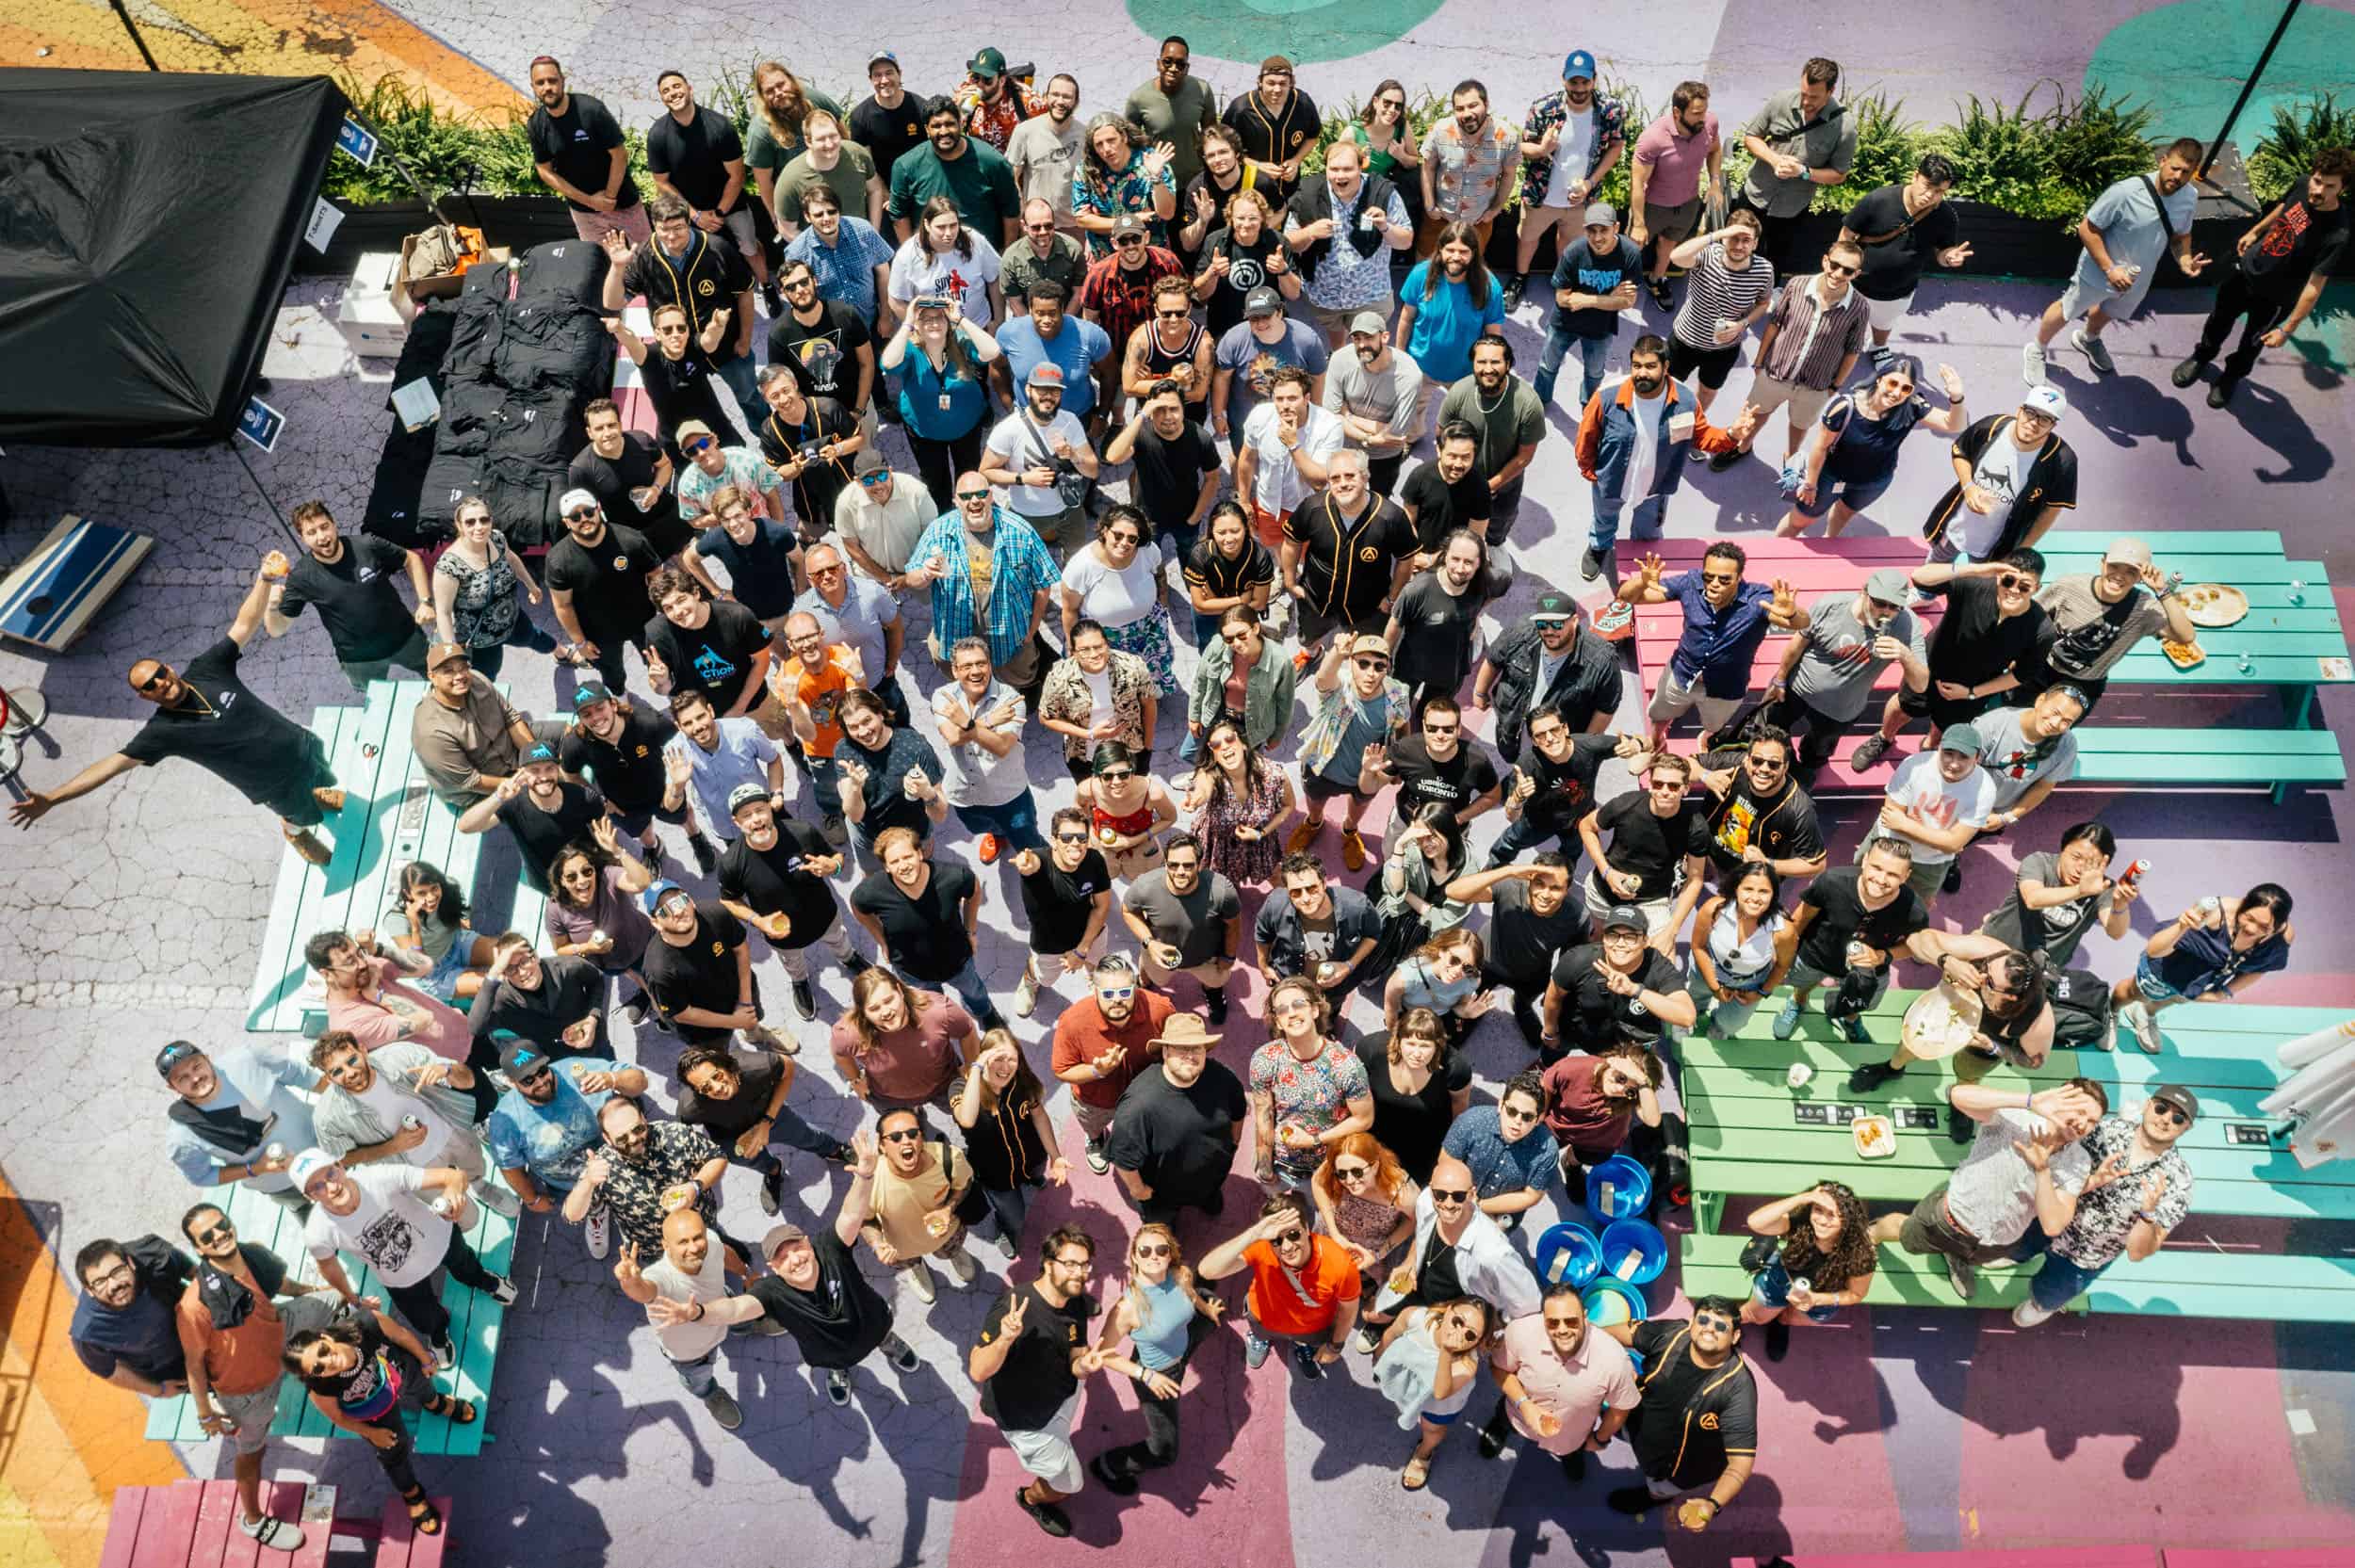 Top-down photo of a crowd of Ubisoft employees outside in downtown Toronto standing on a pastel-painted ground and picnic benches